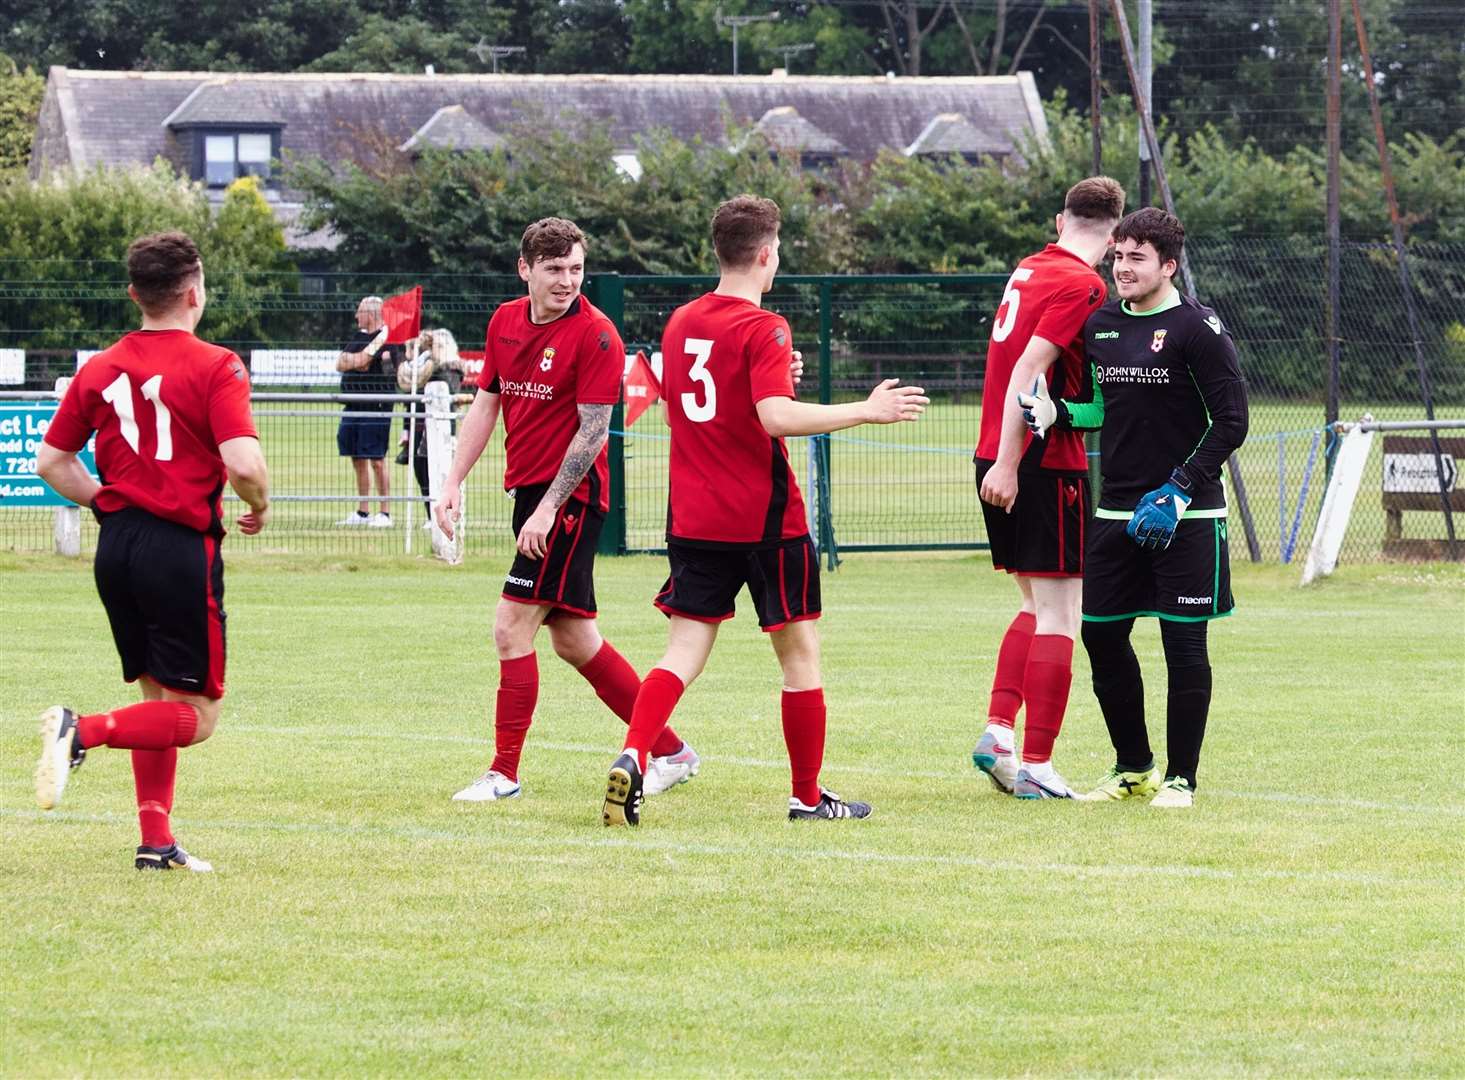 Ellon United keeper Elliot Wills is congratulated for scoring the opening goal. Picture: Phil Harman.